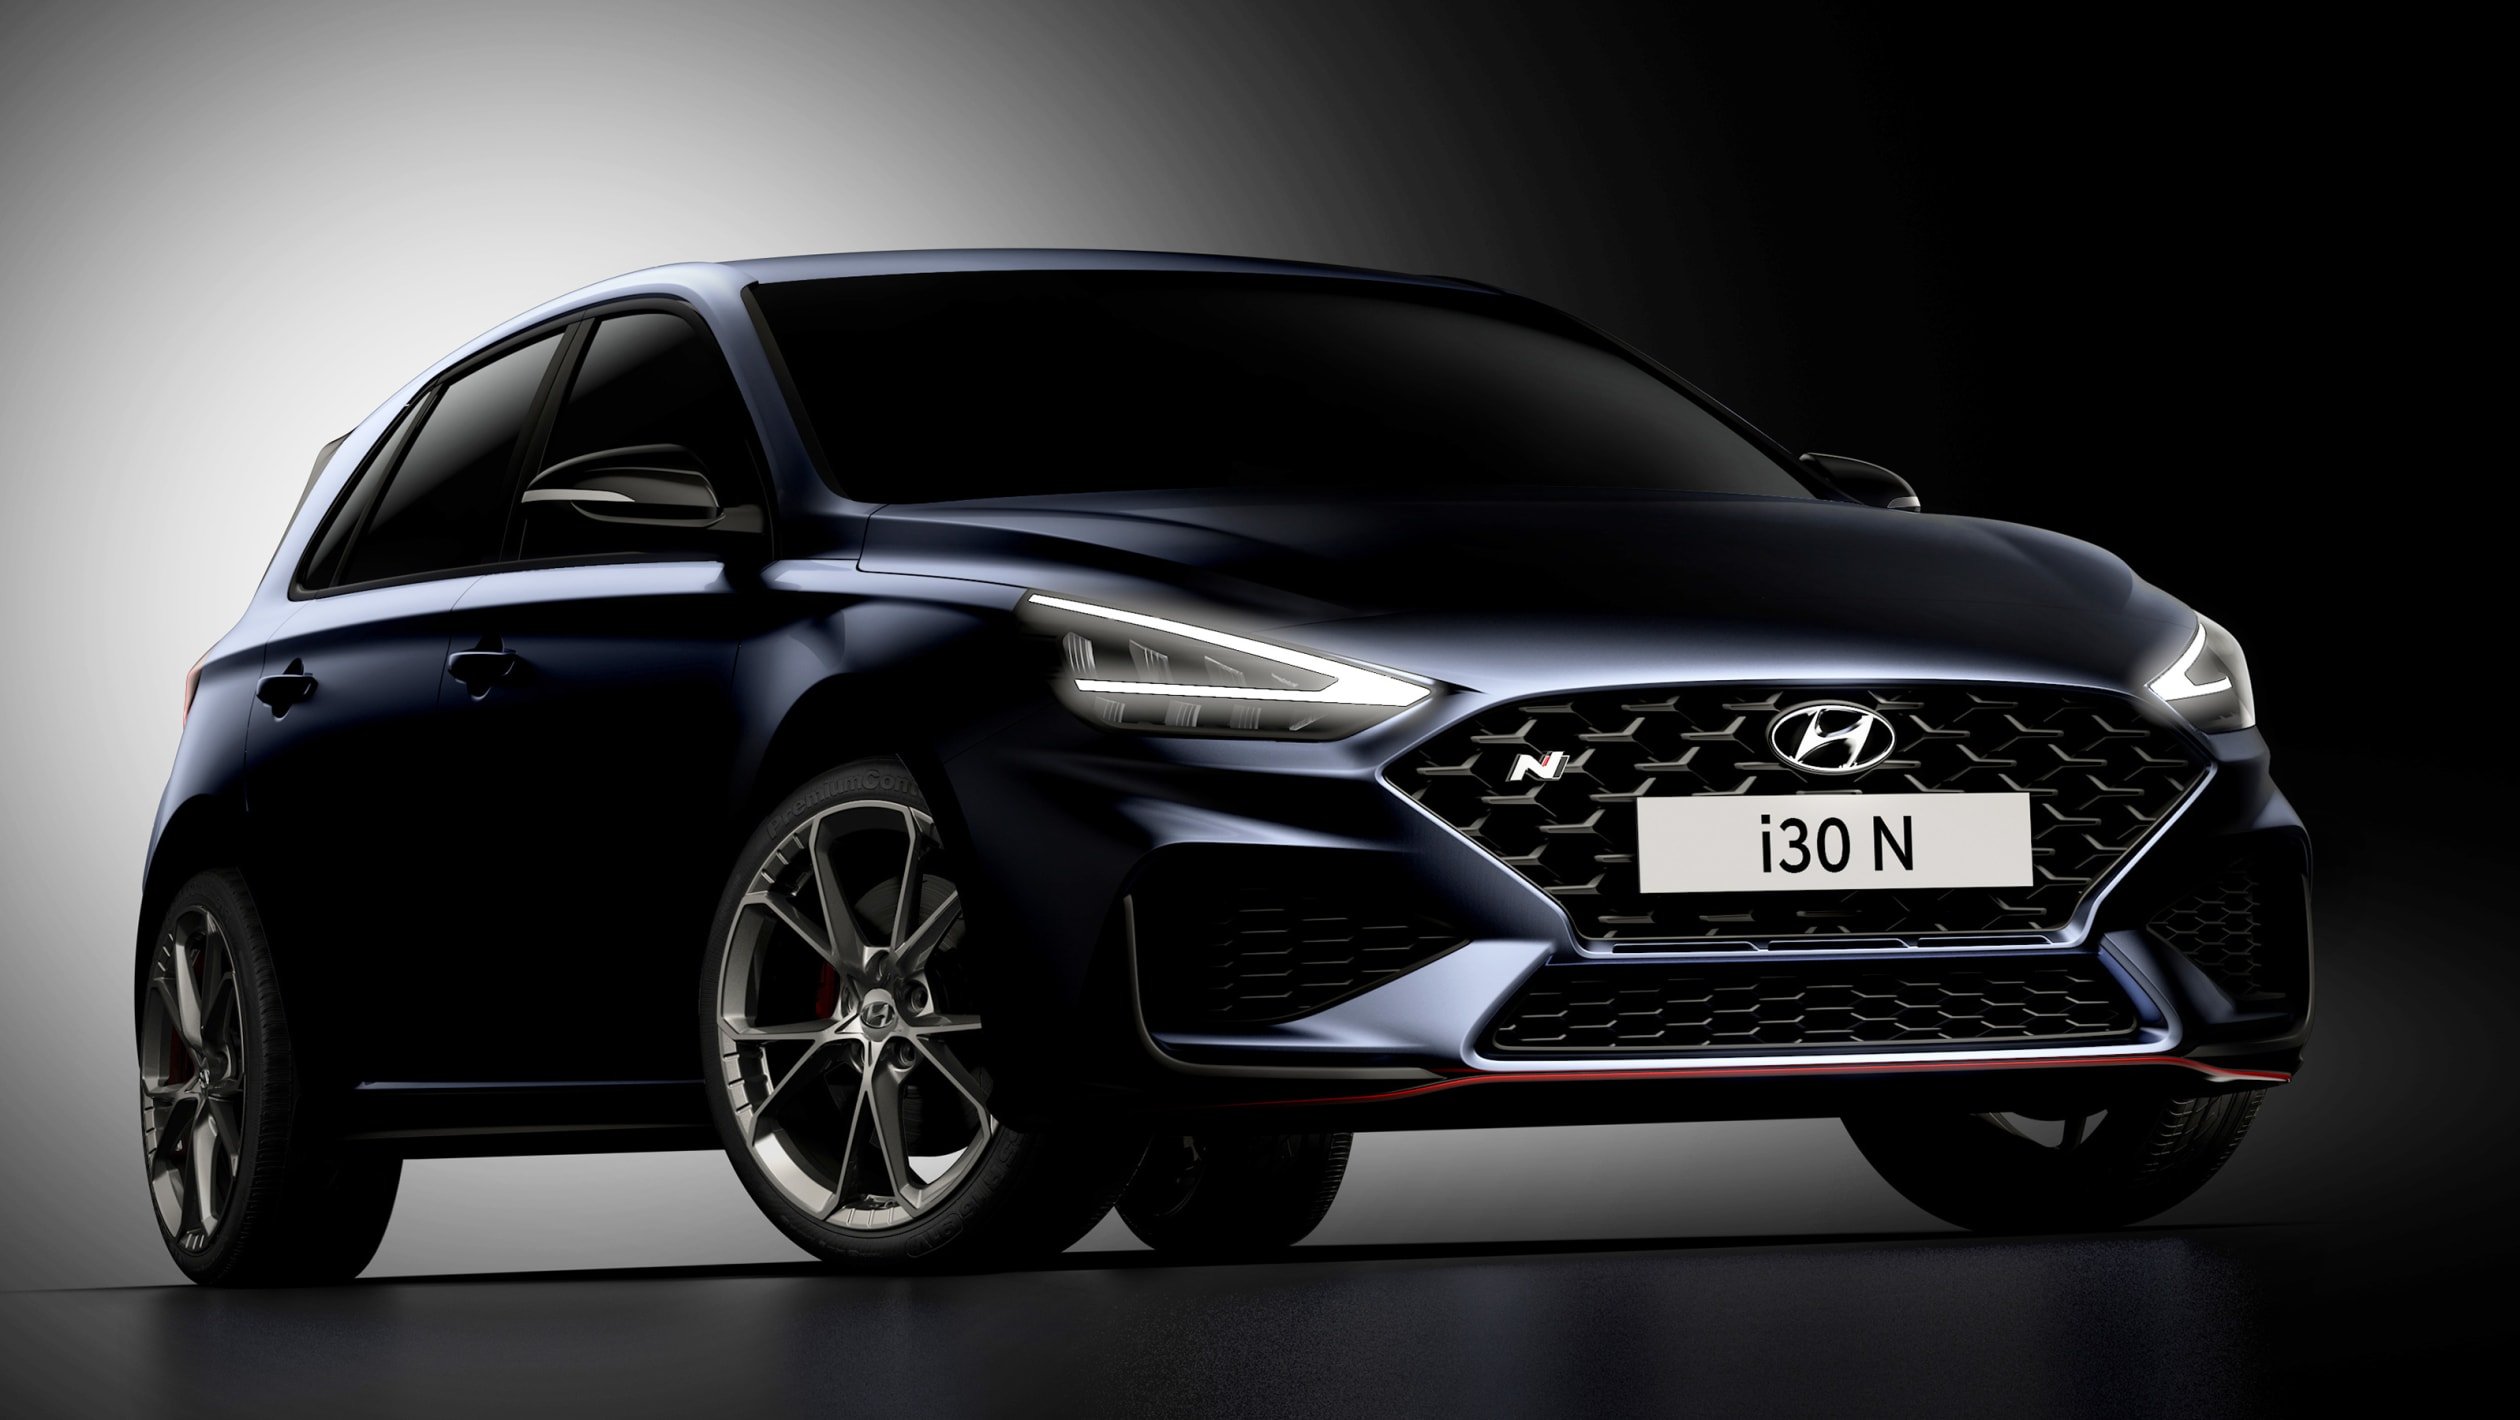 New 2021 Hyundai i30 N teased ahead of official debut